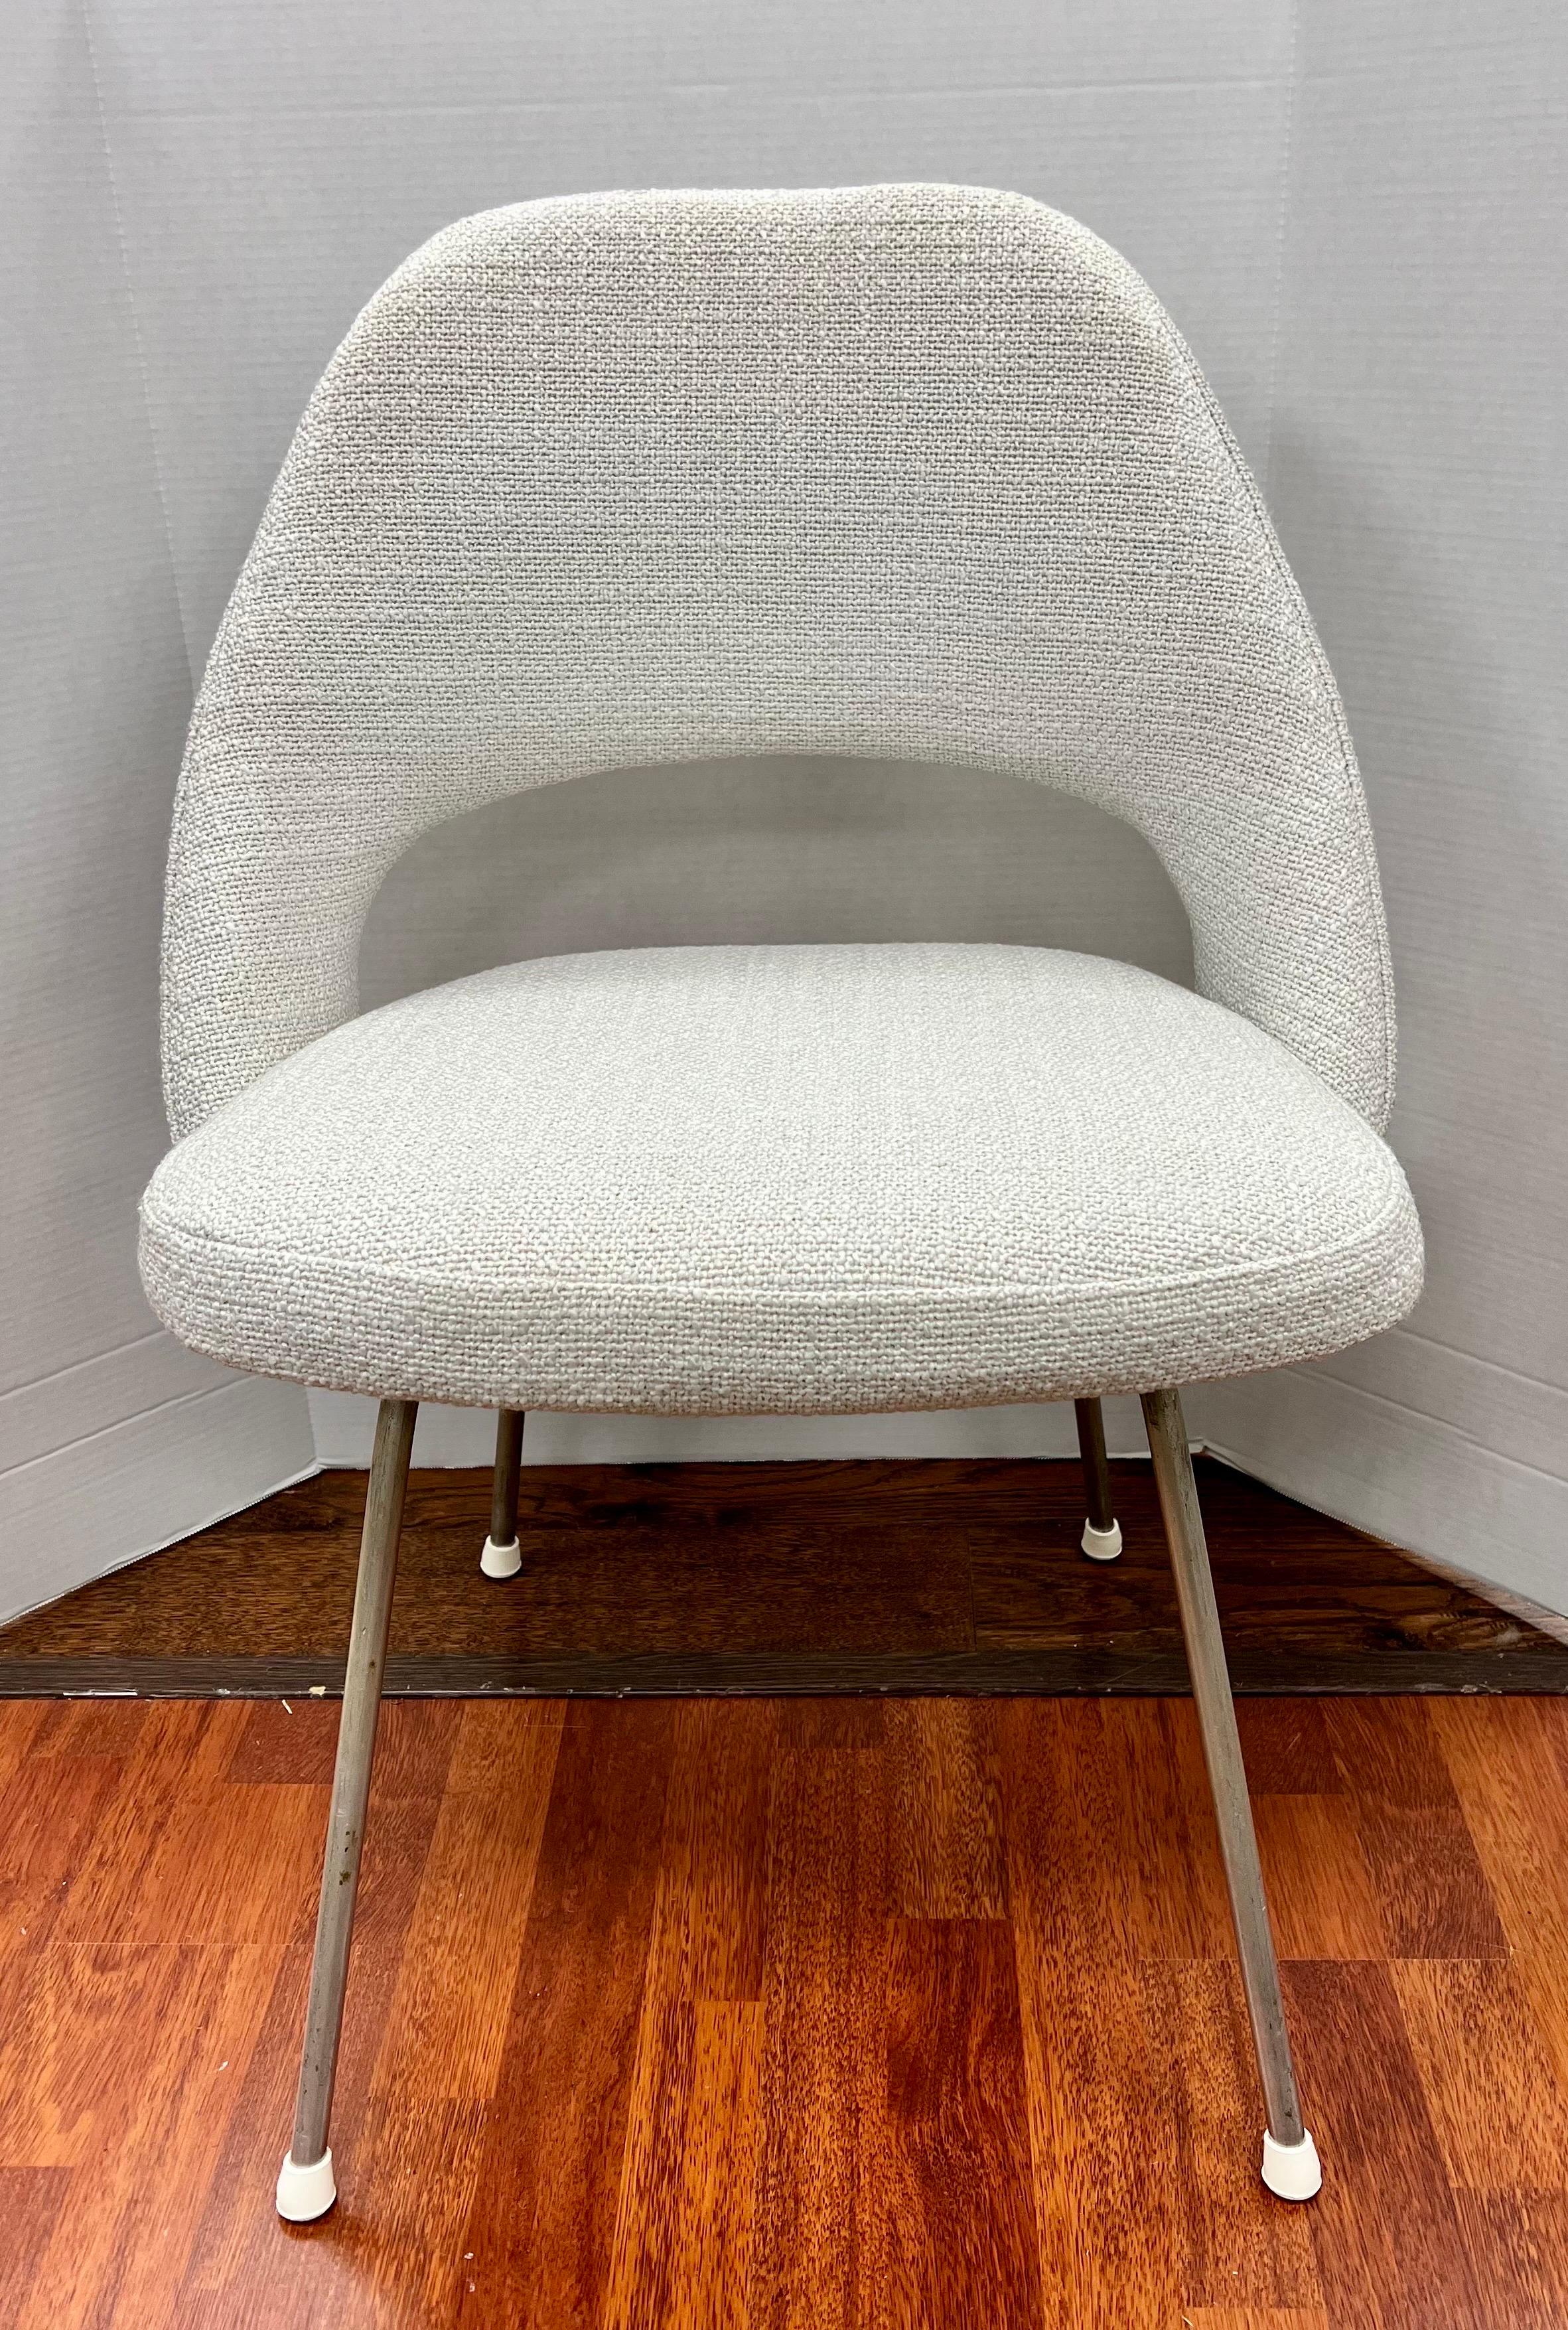 Designed by Eero Saarinen these chairs offer comfort in their form and cushioned upholstery. They are newly upholstered in a neutral woven fabric and rest on steel tubular legs. Why not own the best?